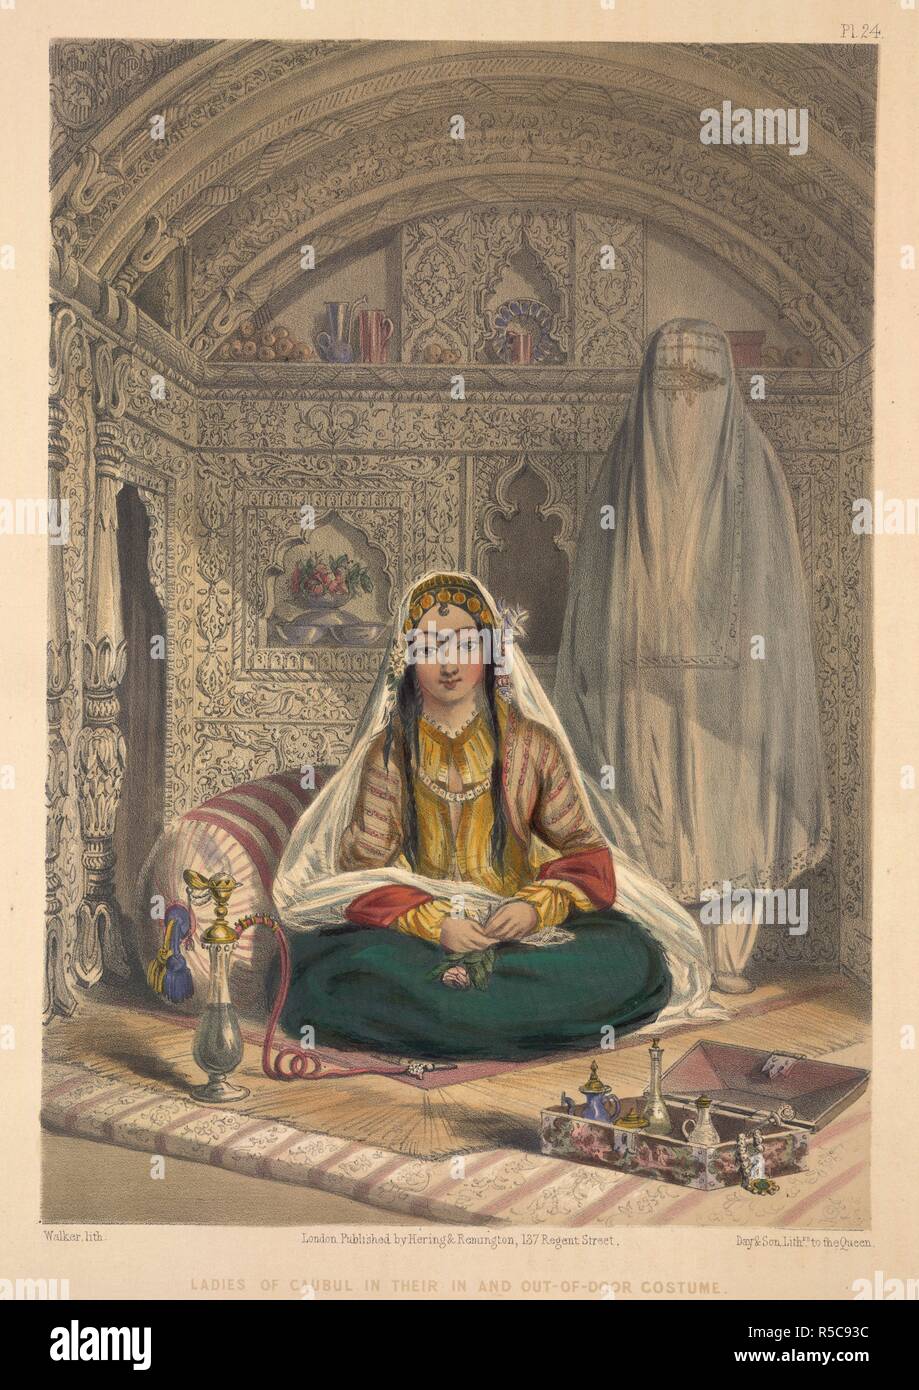 Ladies of Caubul in their In and Out-of-Doors. Scenery, Inhabitants, and Costumes of Afghaunistan. London : Hering & Remington, 1848. Lithograph. Source: X 562, plate 24. Author: CARRICK, ROBERT. Stock Photo